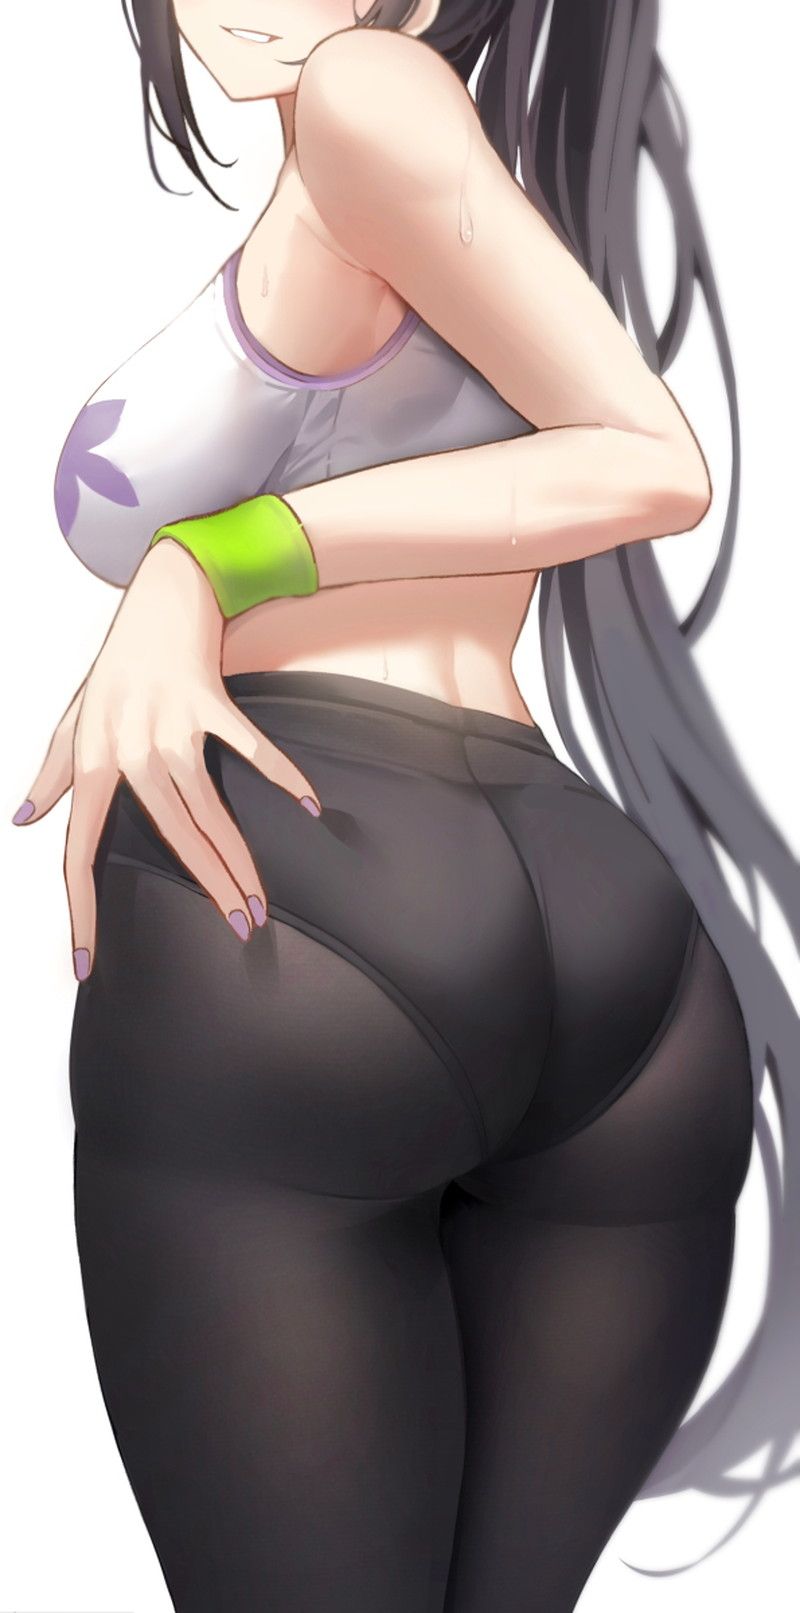 Secondary] It is erotic to look like the line of the buttocks can be clearly seen 10